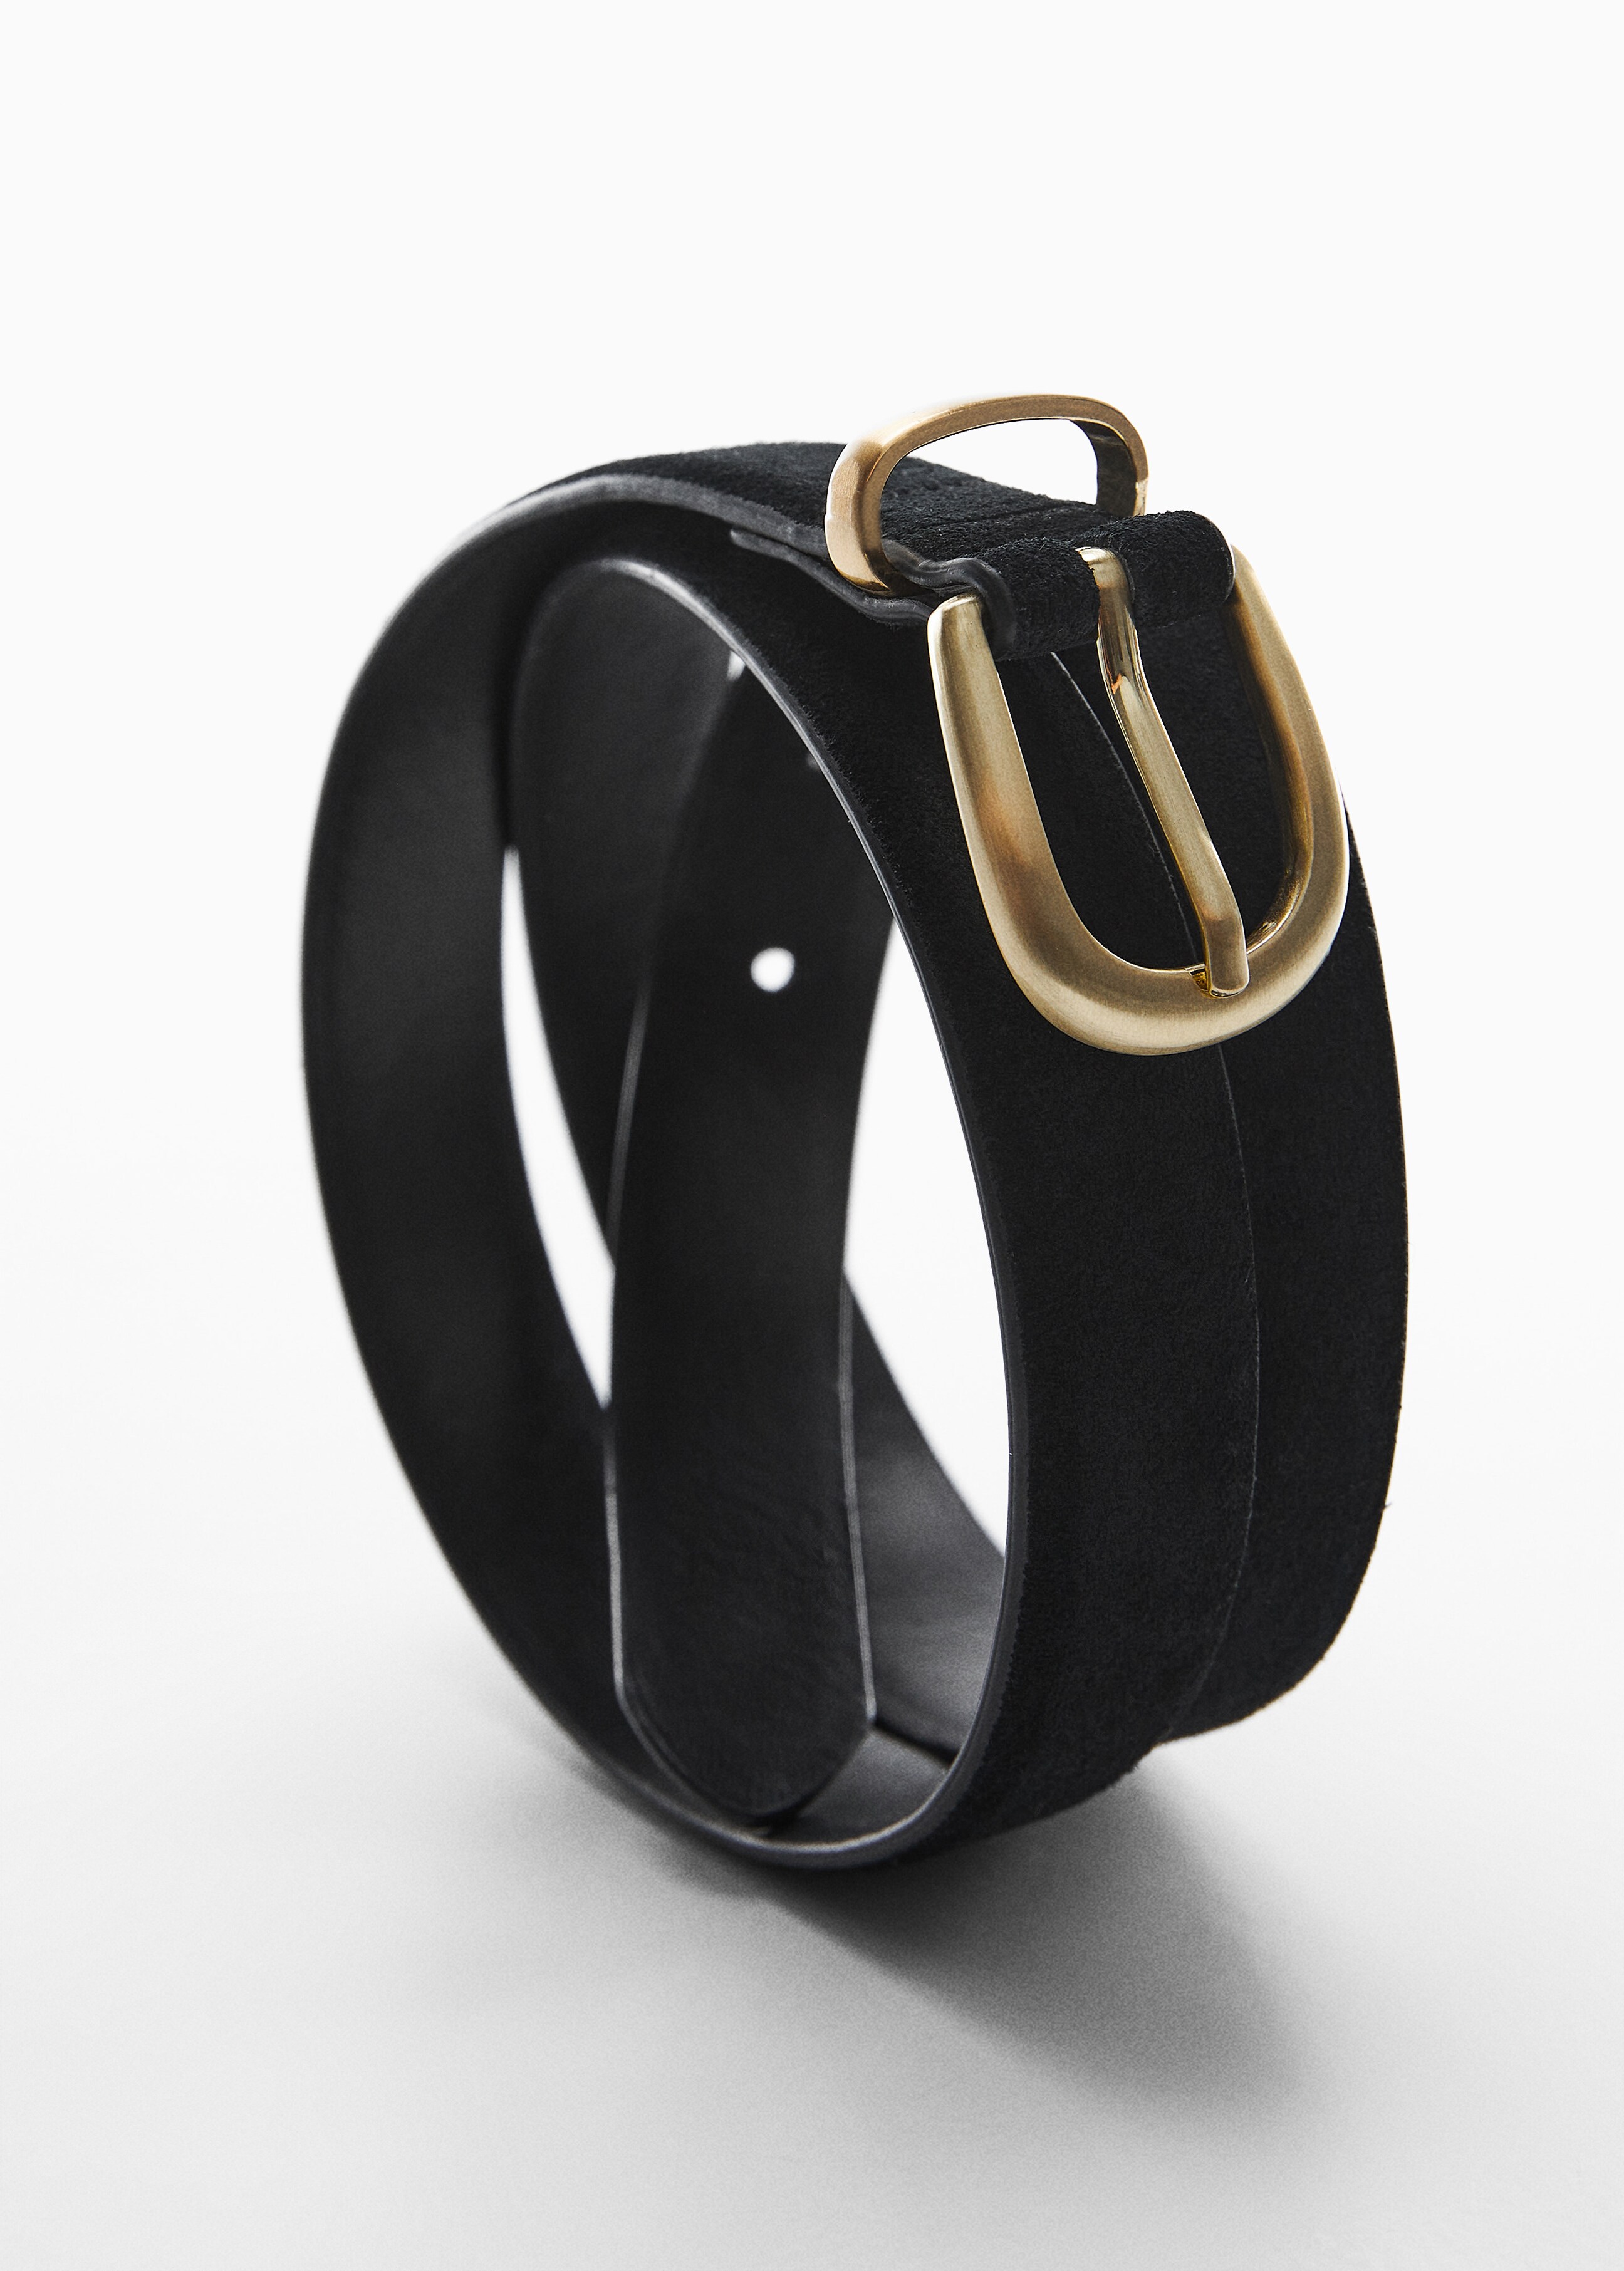 Buckle leather belt - Details of the article 5